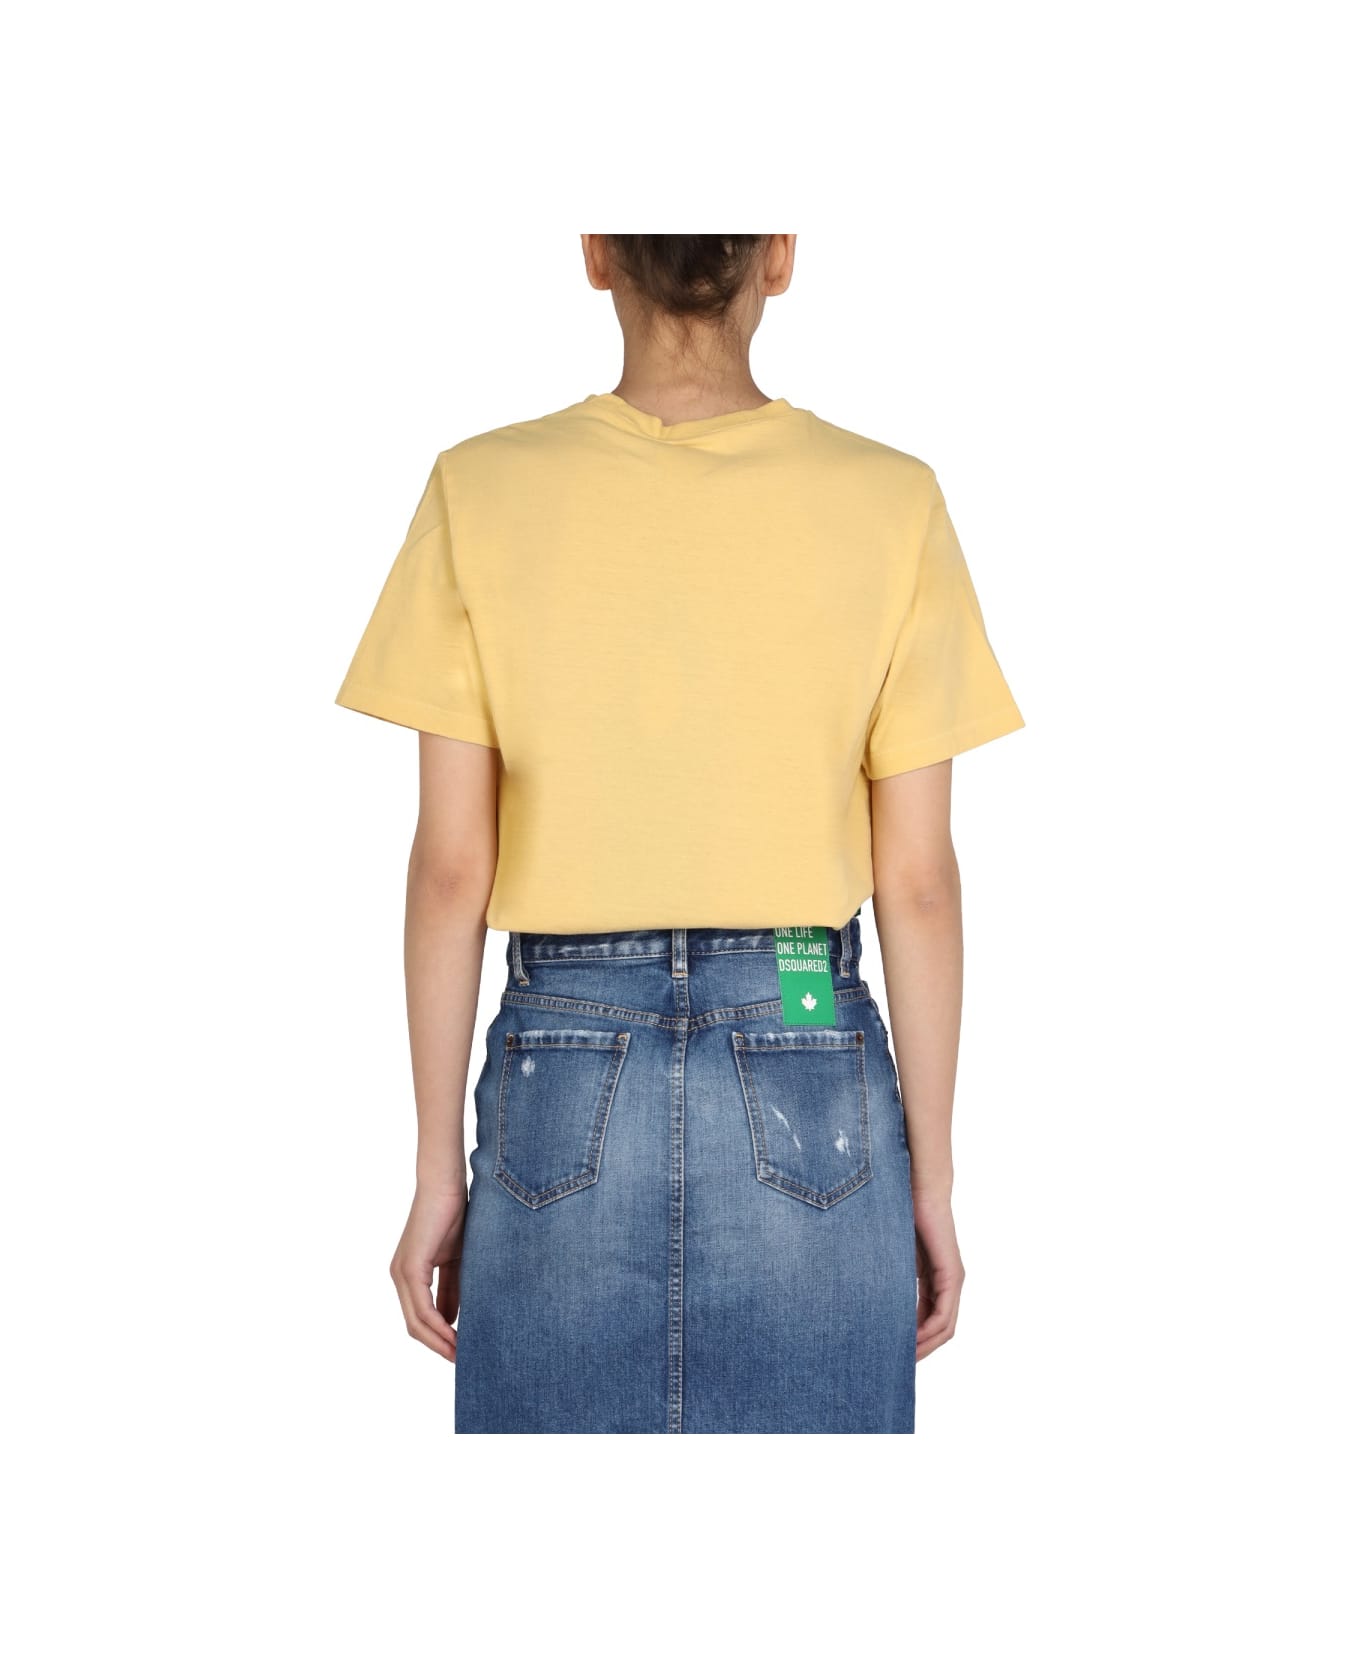 Dsquared2 "one Life One Planet" T-shirt - YELLOW